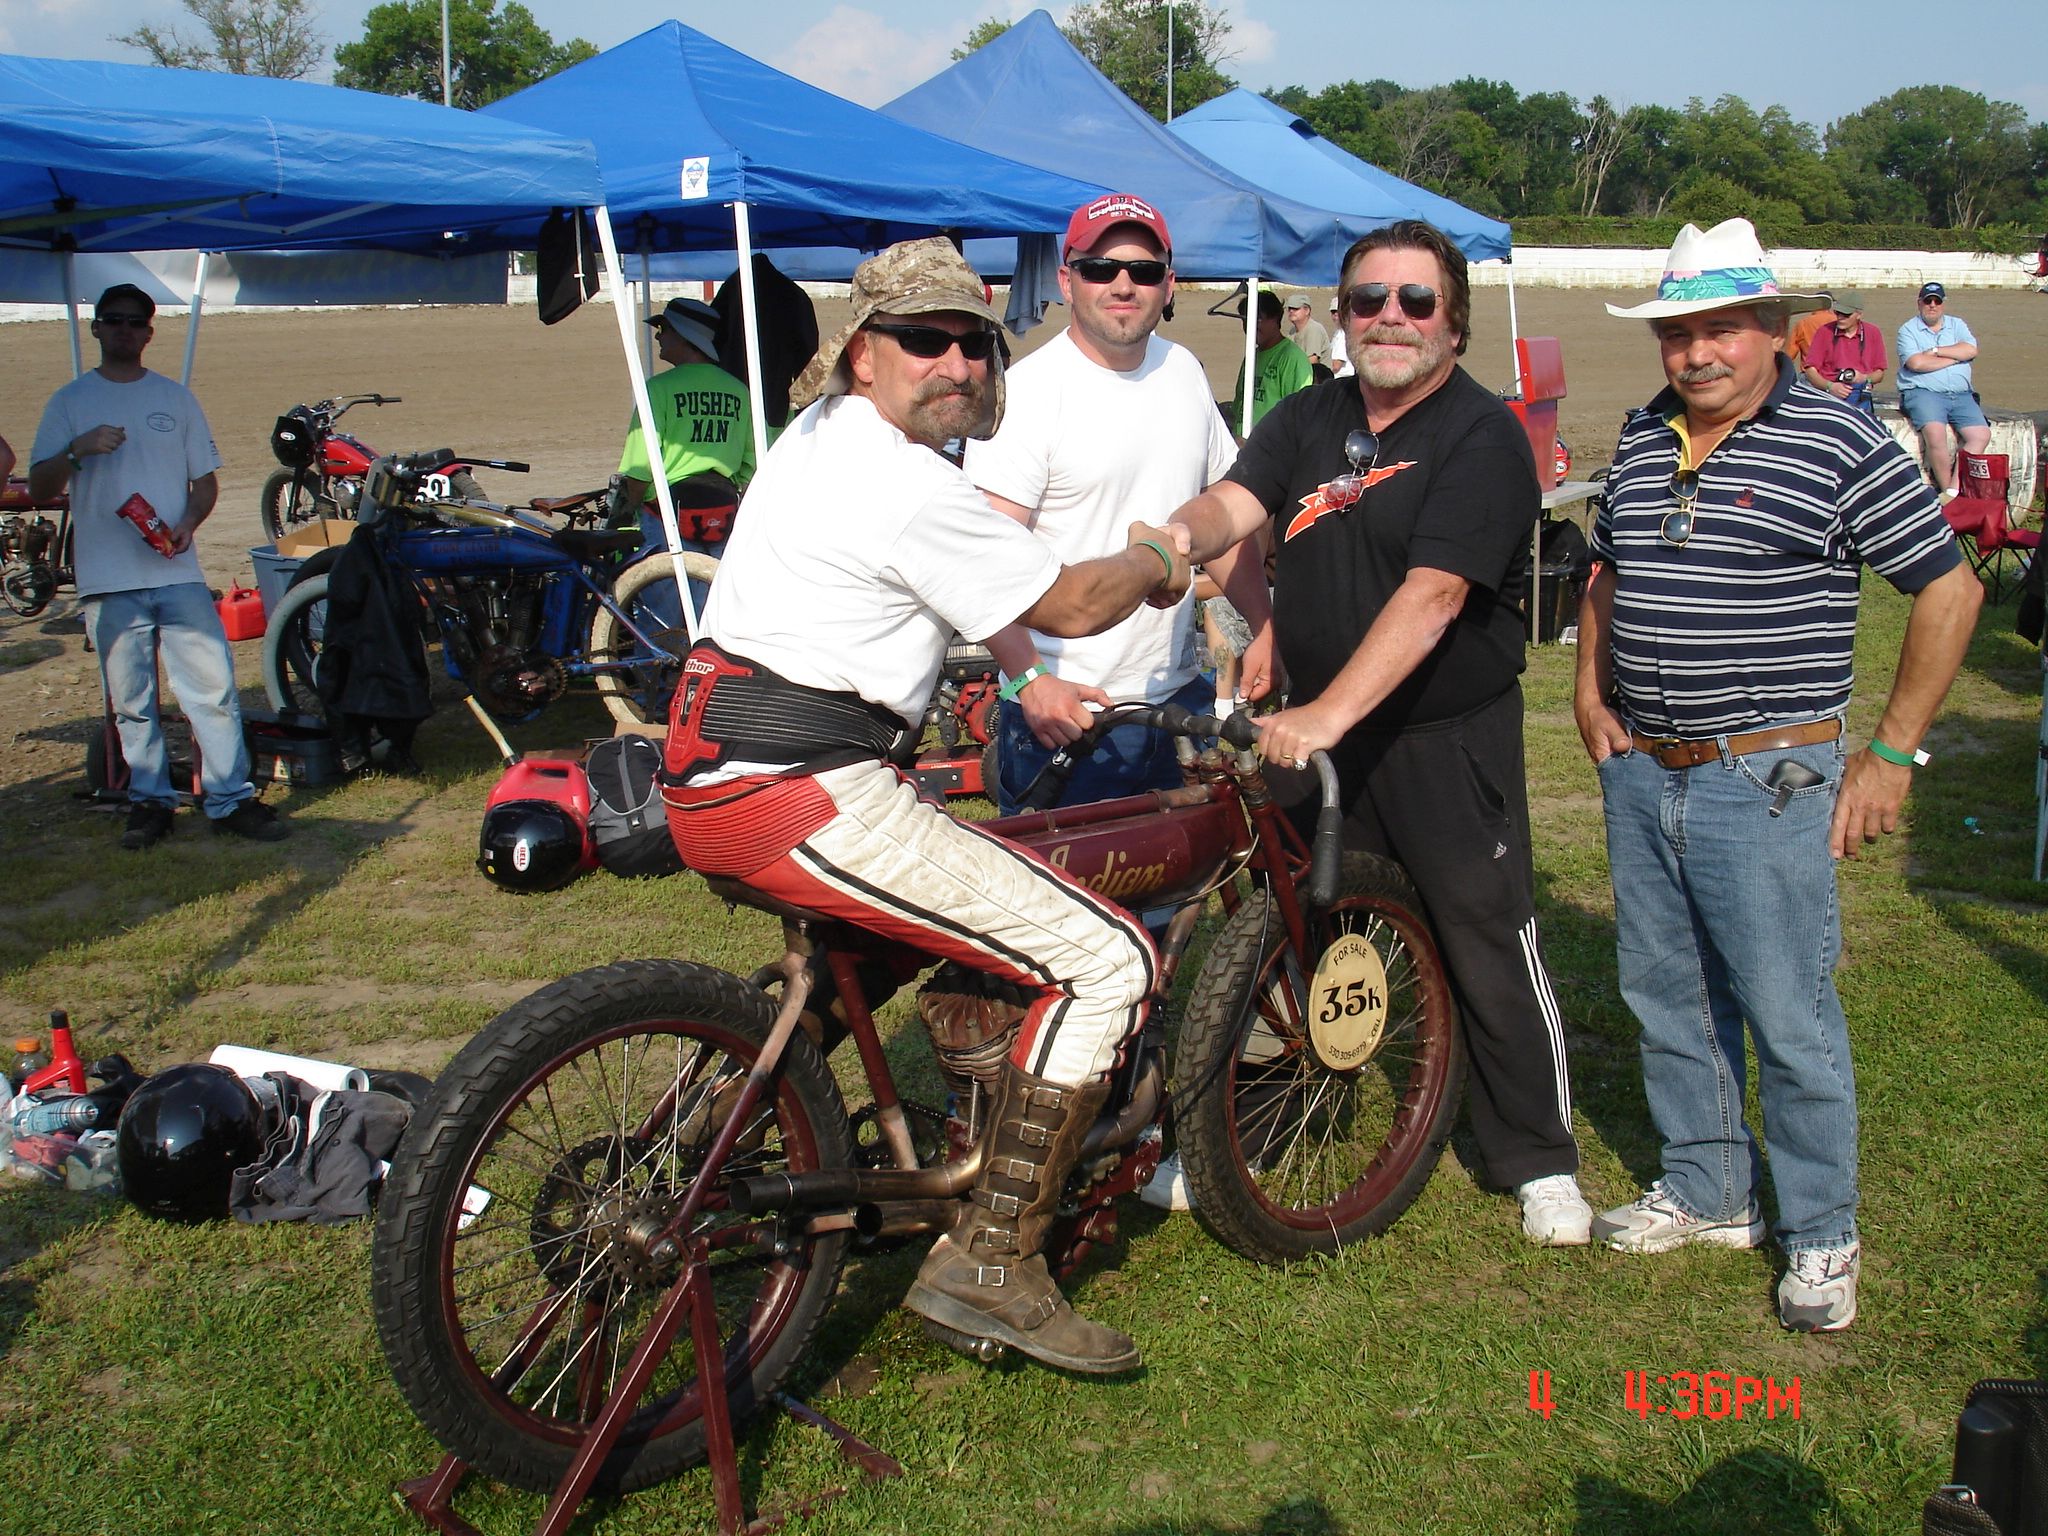 Vince Martenico (on bike), Sean Brayton, Dick Shappy, and Ray Belsito pose with Vince's 1920s Indian Twin.